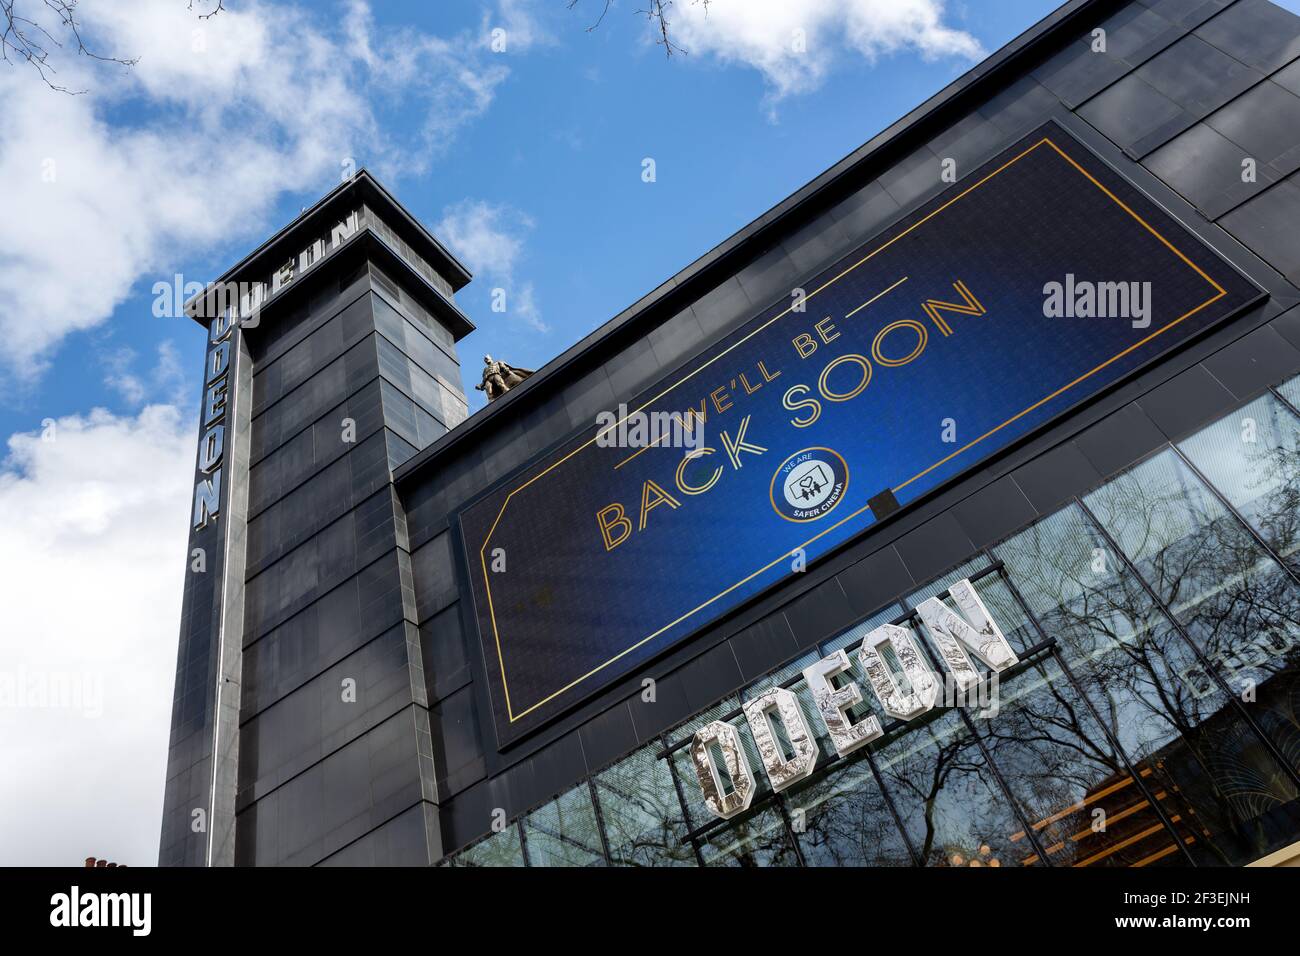 Closed Odeon Cinema with Back Soon sign during COVID-19 Pandemic, Leicester Square, London Stock Photo